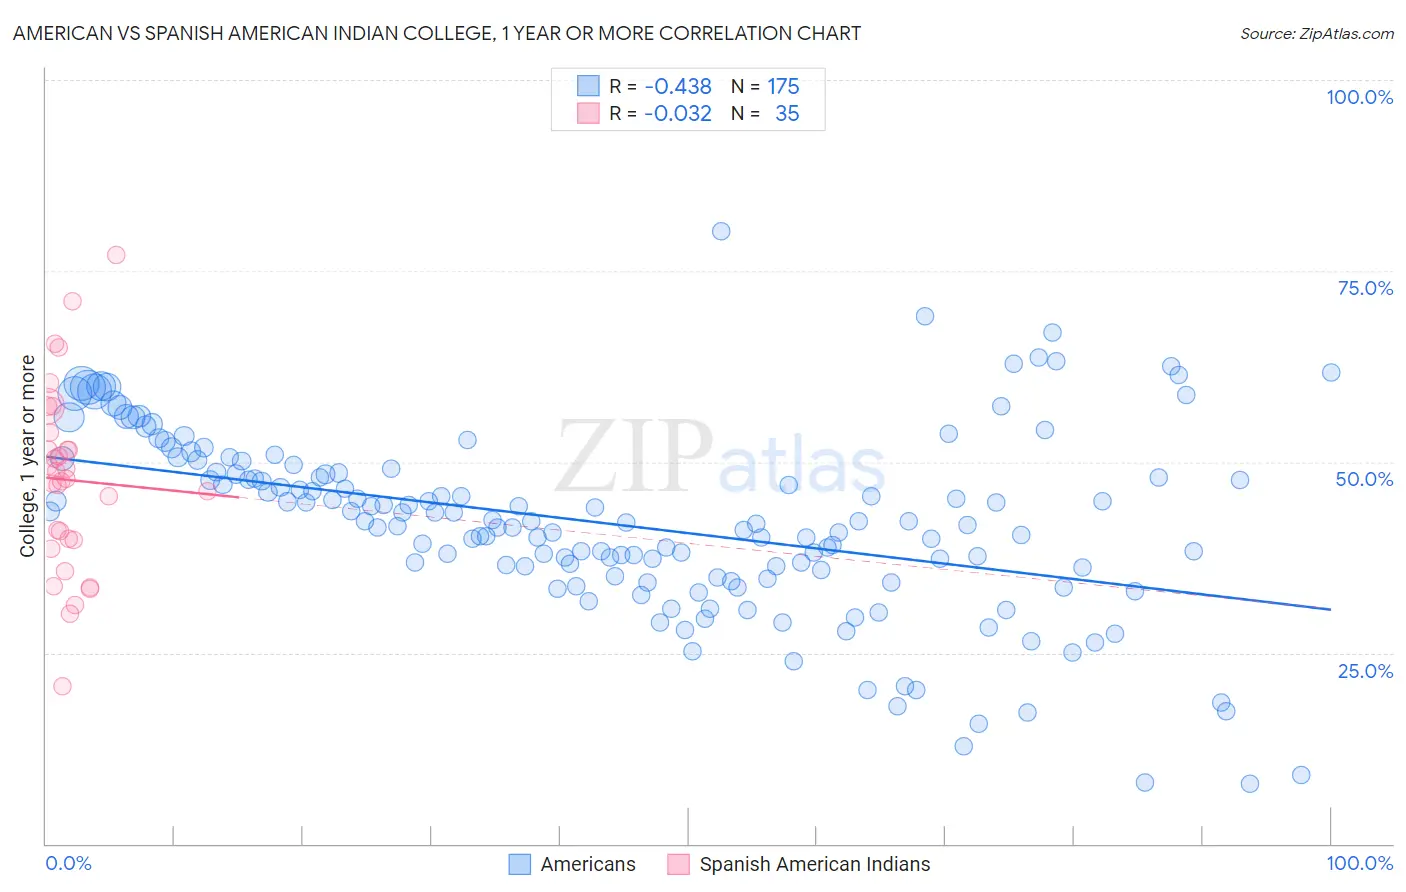 American vs Spanish American Indian College, 1 year or more